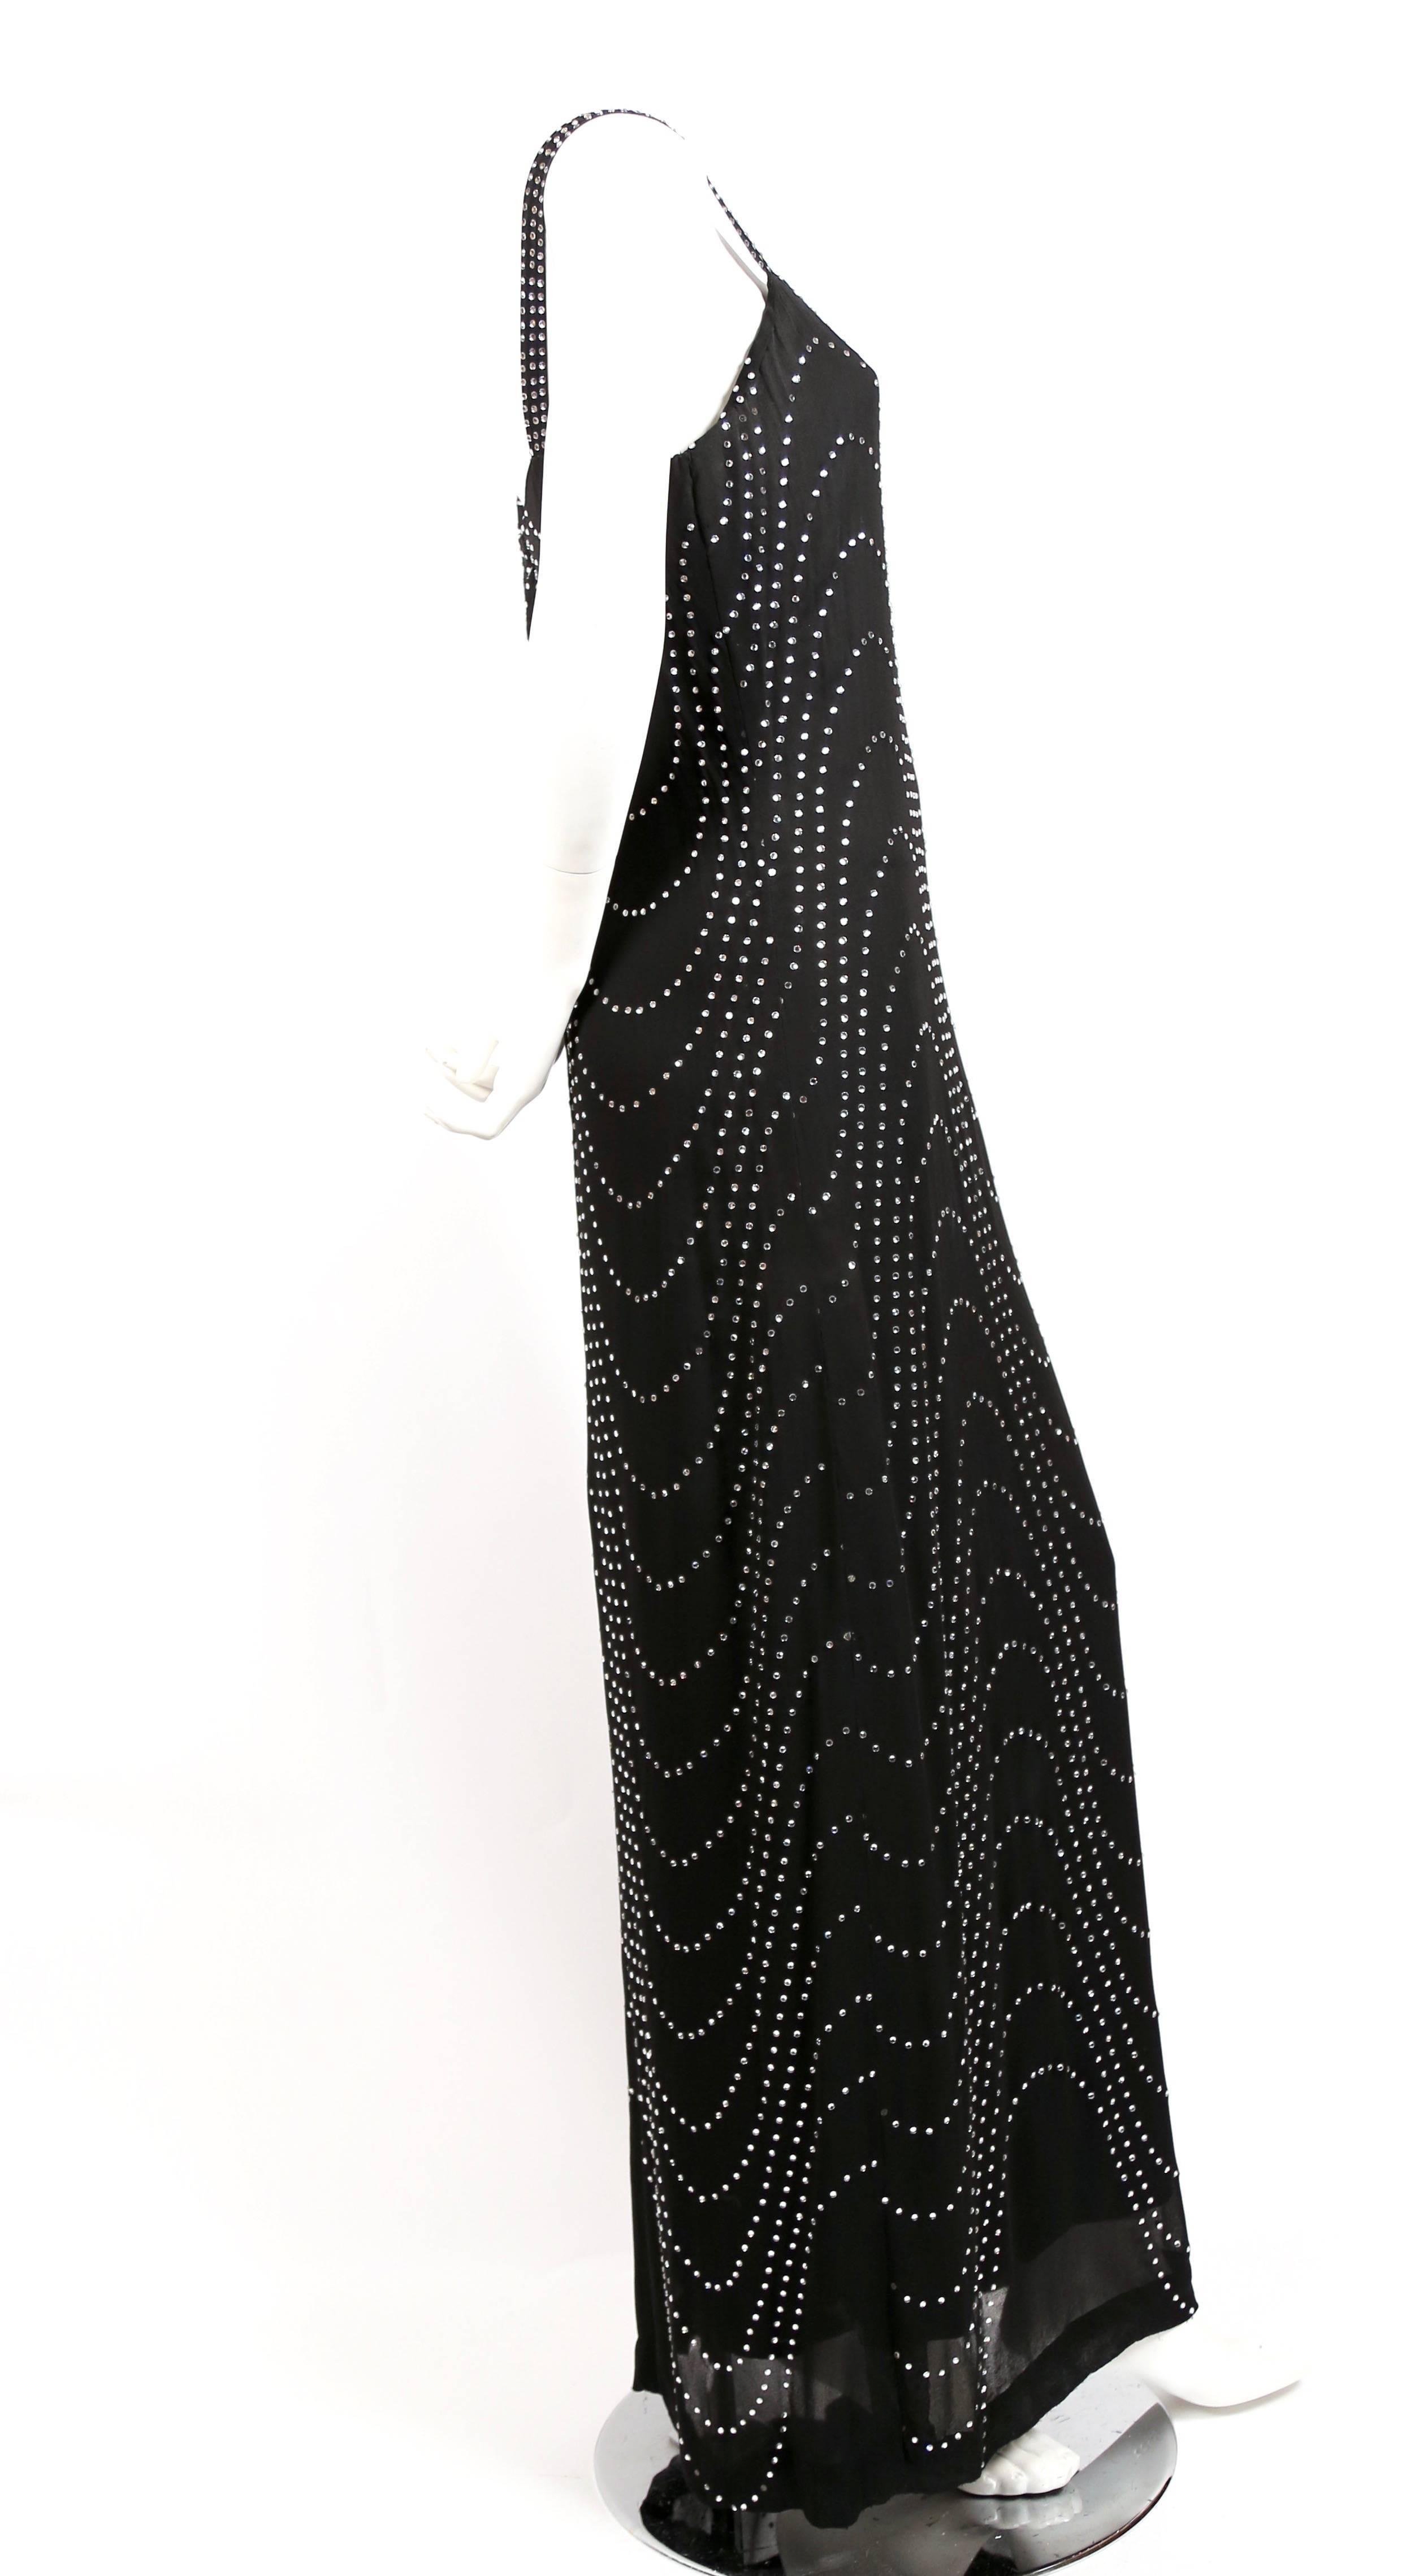 Very rare black silk chiffon floor length haute couture gown with artfully arranged crystals from Pierre Balmain dating to the 1960's. Fits a US size 4 to 6. Approximate measurements: bust 33